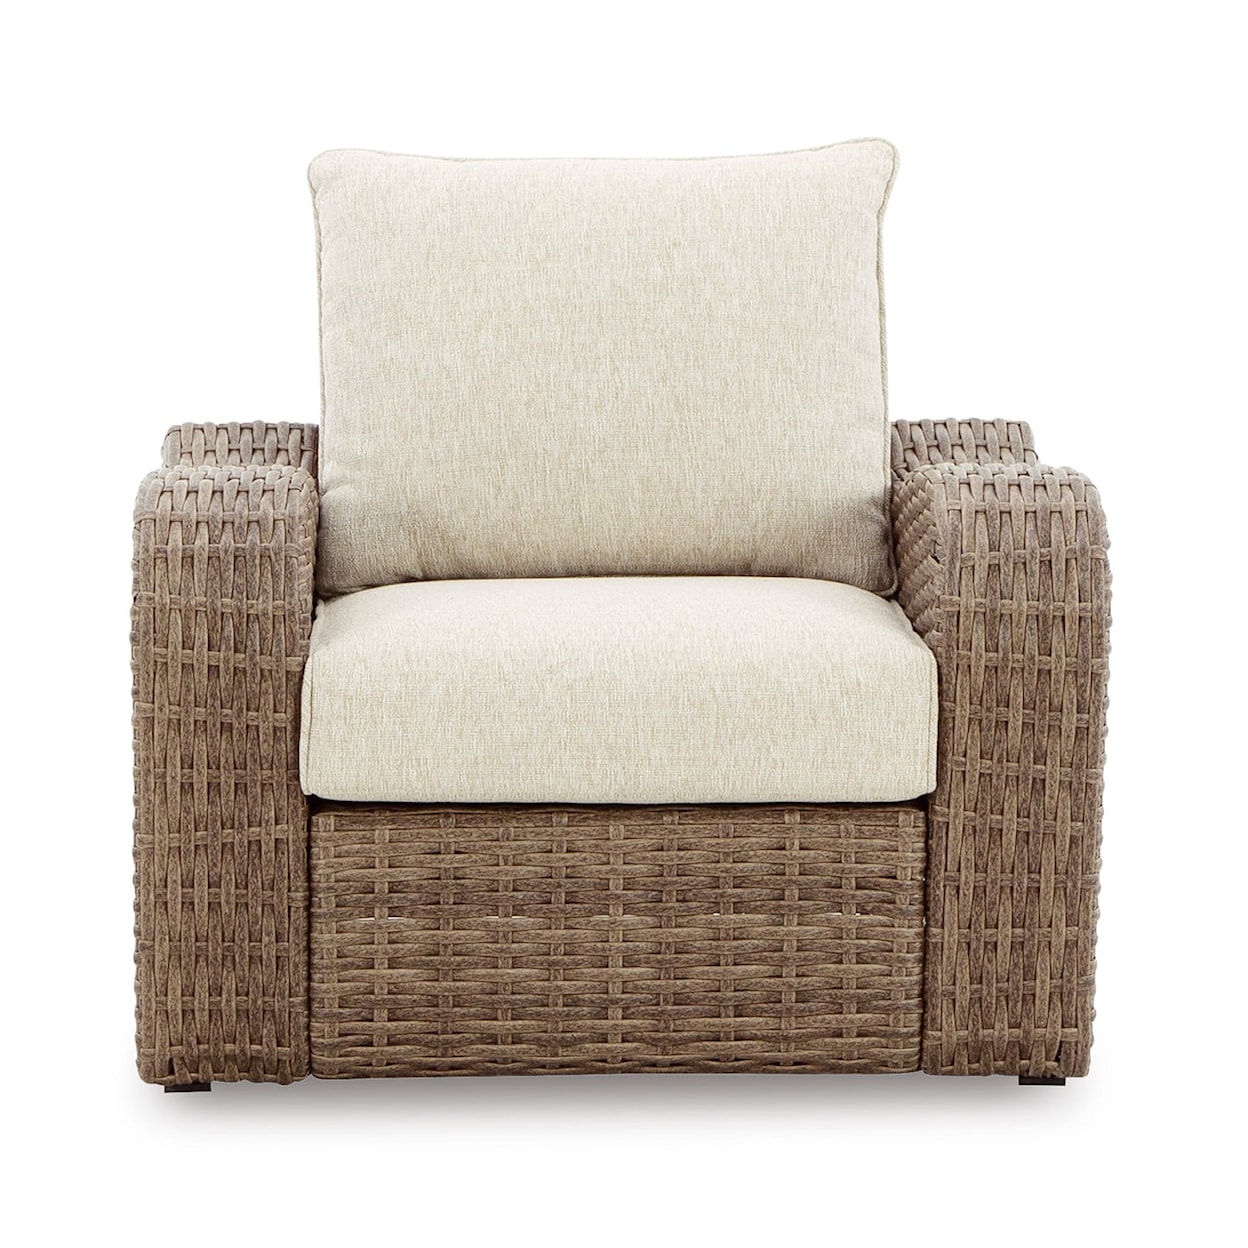 Signature Design by Ashley Sandy Bloom Outdoor Lounge Chair with Cushion